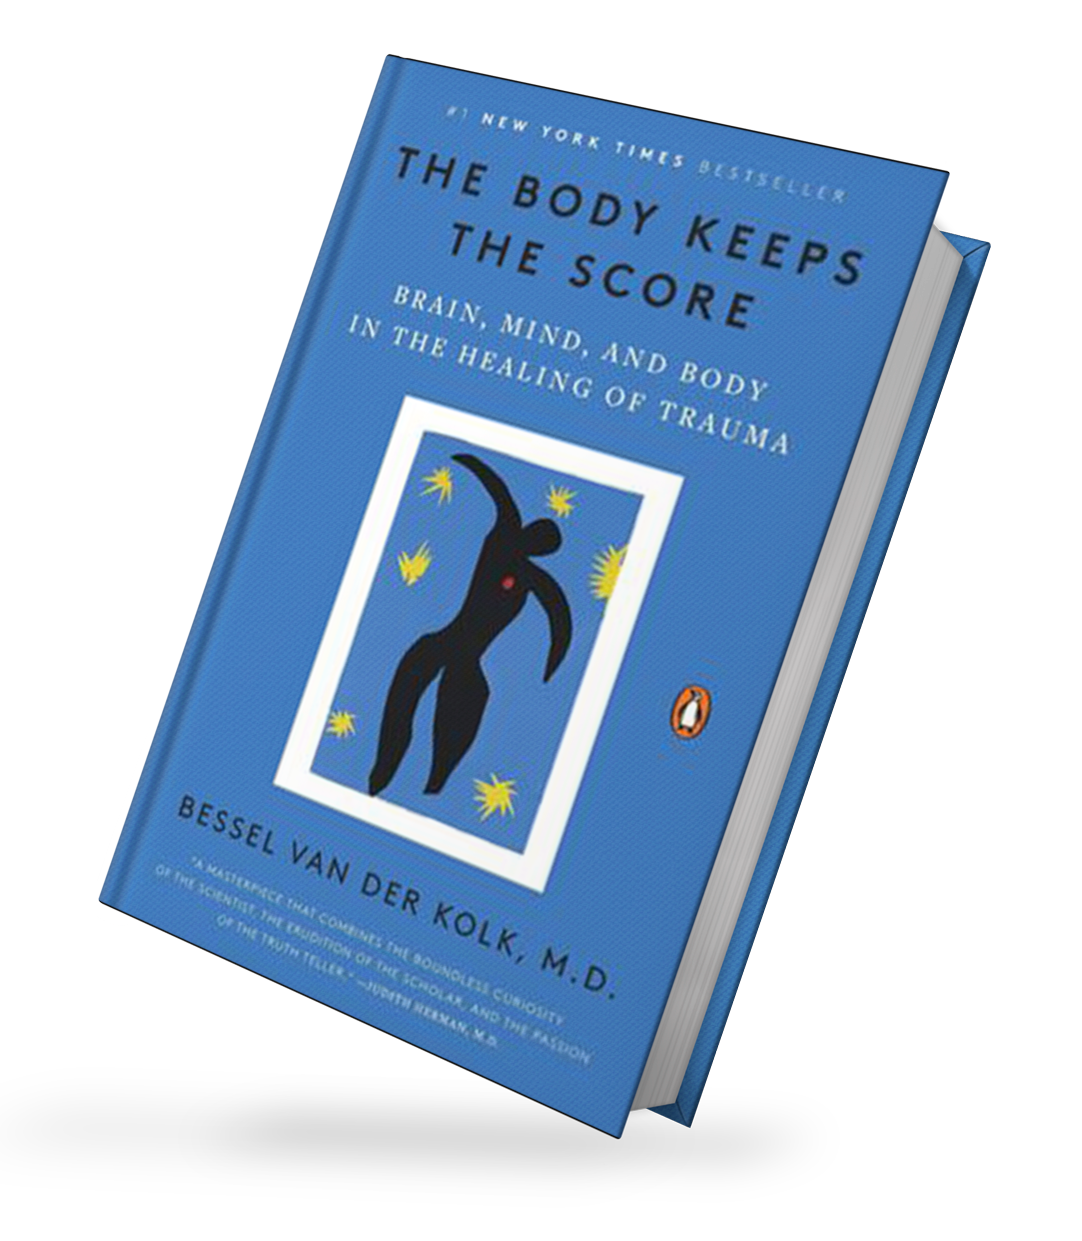 The Body Keeps The Score